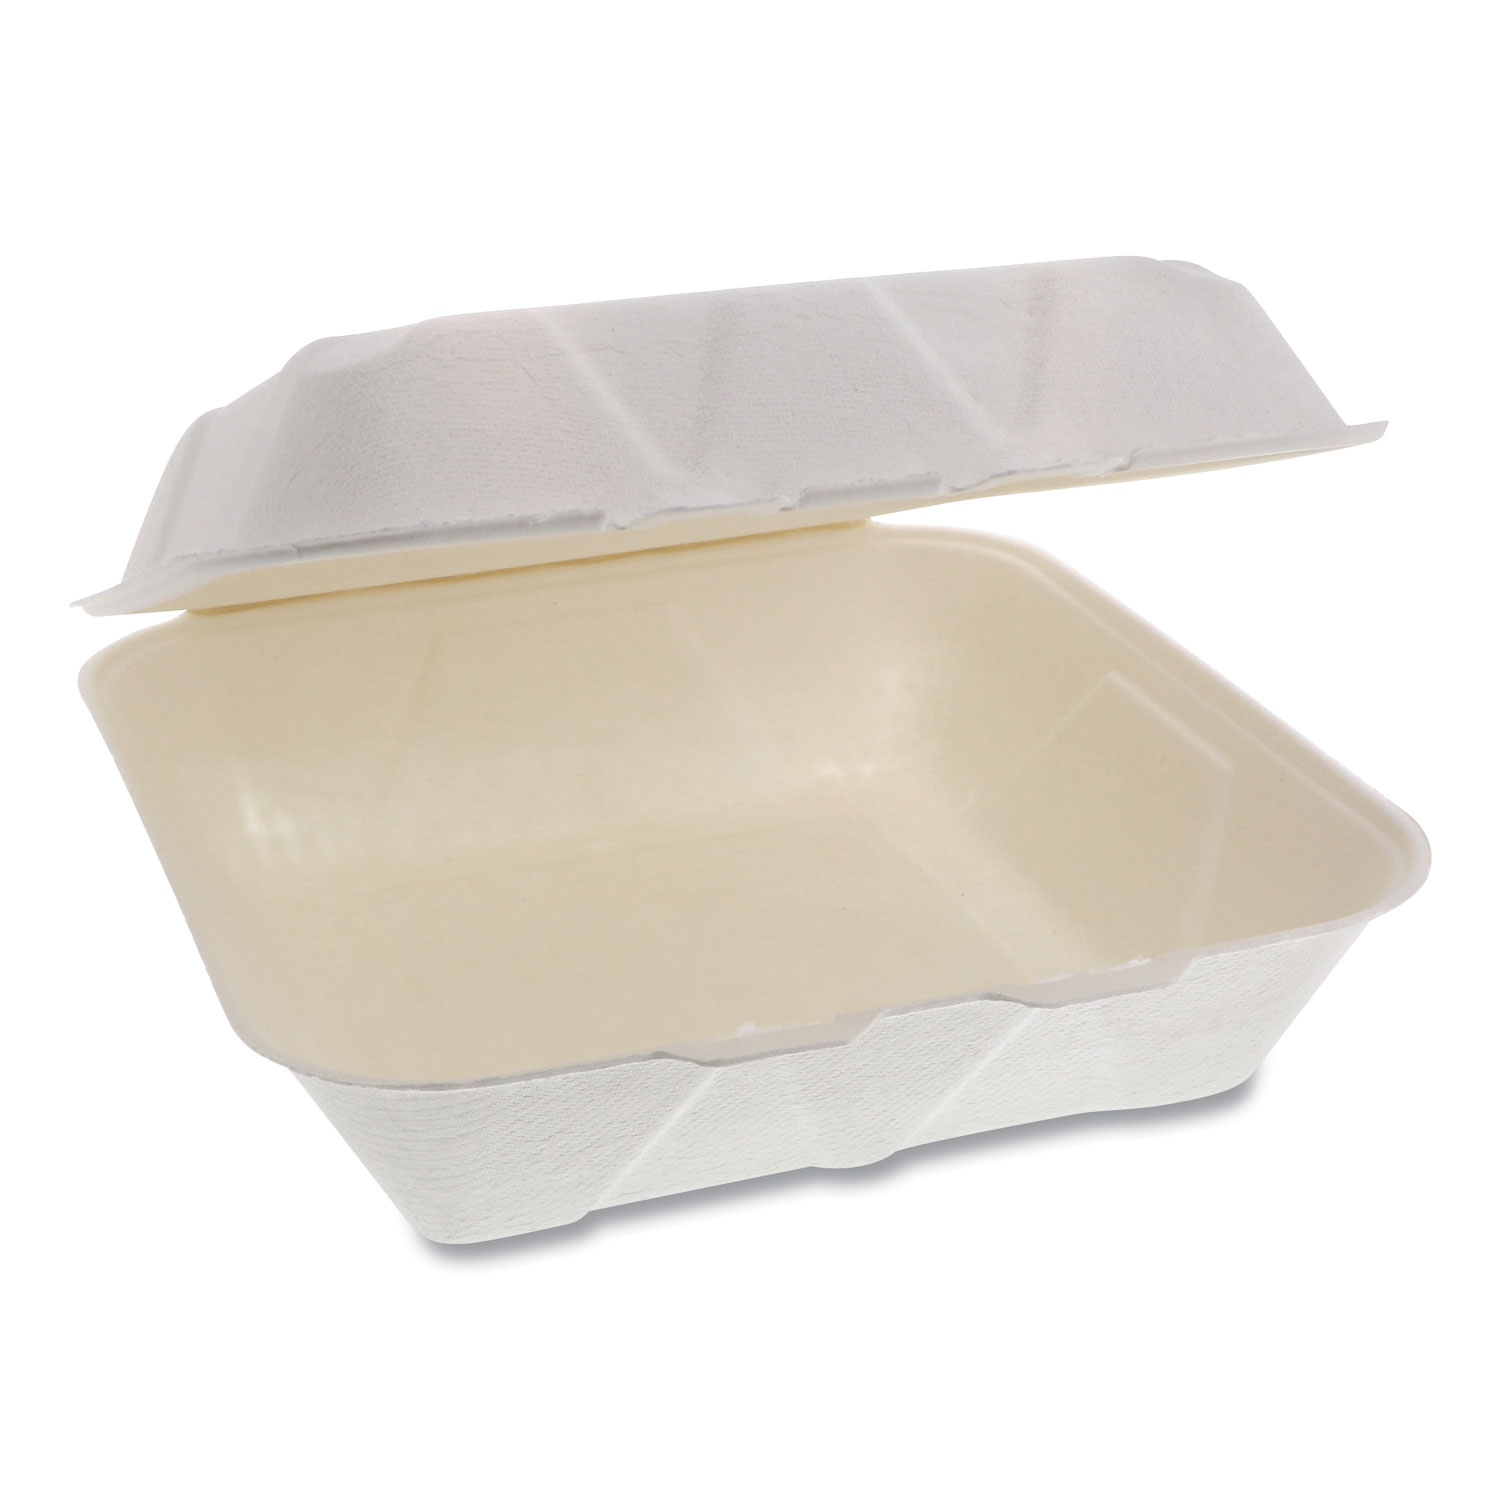  Pactiv YMCH09010001 EarthChoice Bagasse Hinged Lid Container, 9 x 9 x 3.5, 1-Compartment, Natural, 150/Carton (PCTYMCH09010001) 